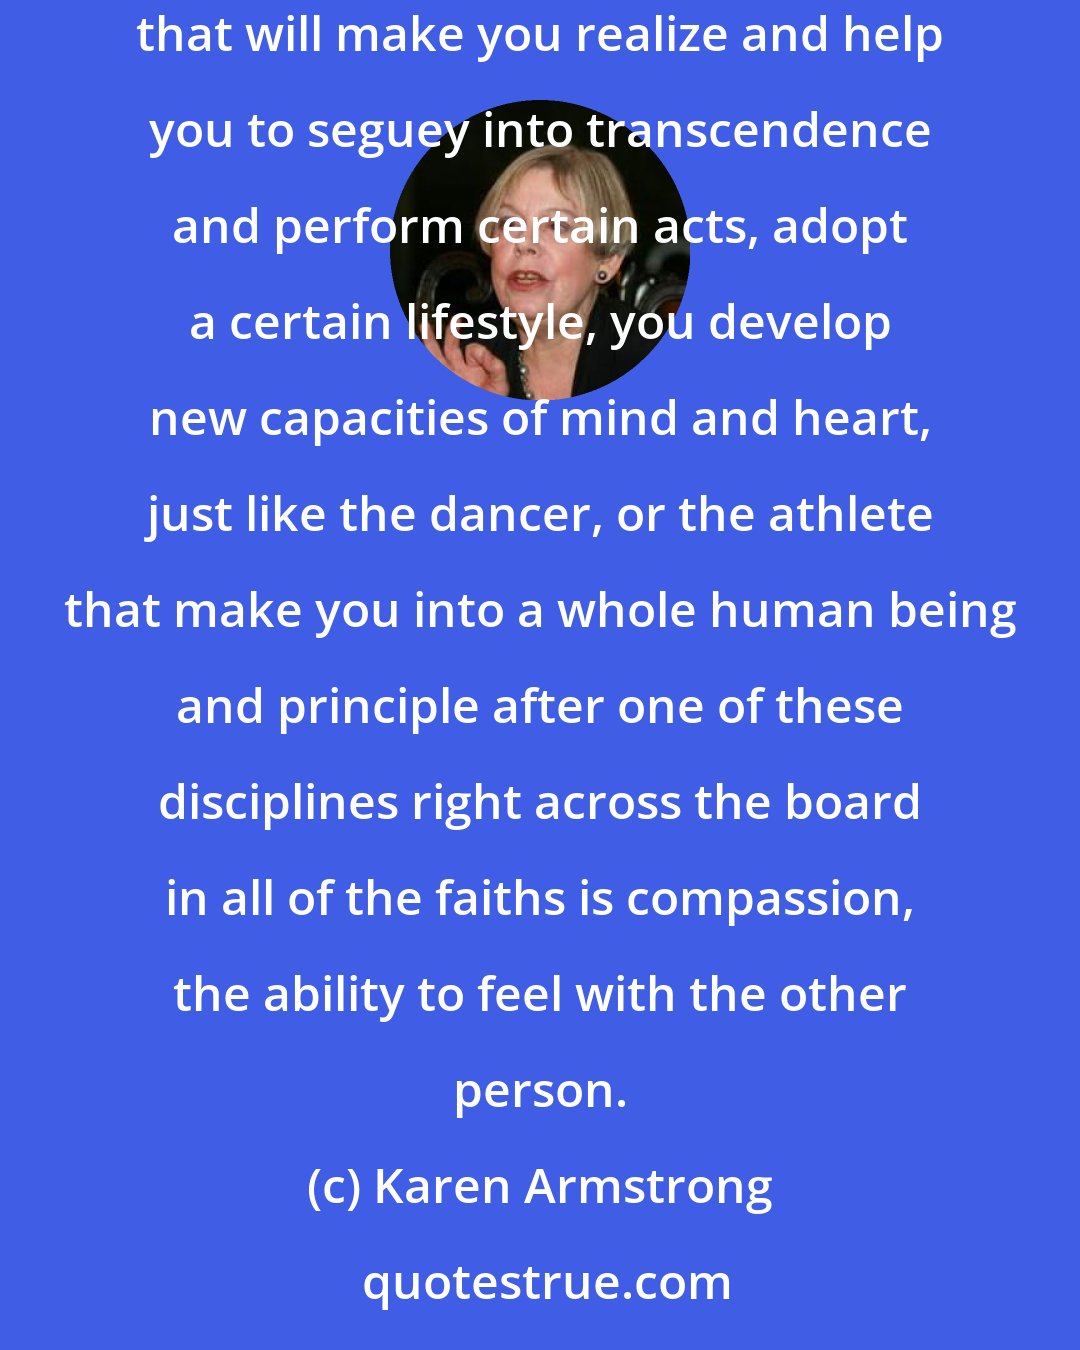 Karen Armstrong: Religions have found that if you behave in a certain way, if you sort of perform certain rituals that expand your mind and make you realize that will make you realize and help you to seguey into transcendence and perform certain acts, adopt a certain lifestyle, you develop new capacities of mind and heart, just like the dancer, or the athlete that make you into a whole human being and principle after one of these disciplines right across the board in all of the faiths is compassion, the ability to feel with the other person.